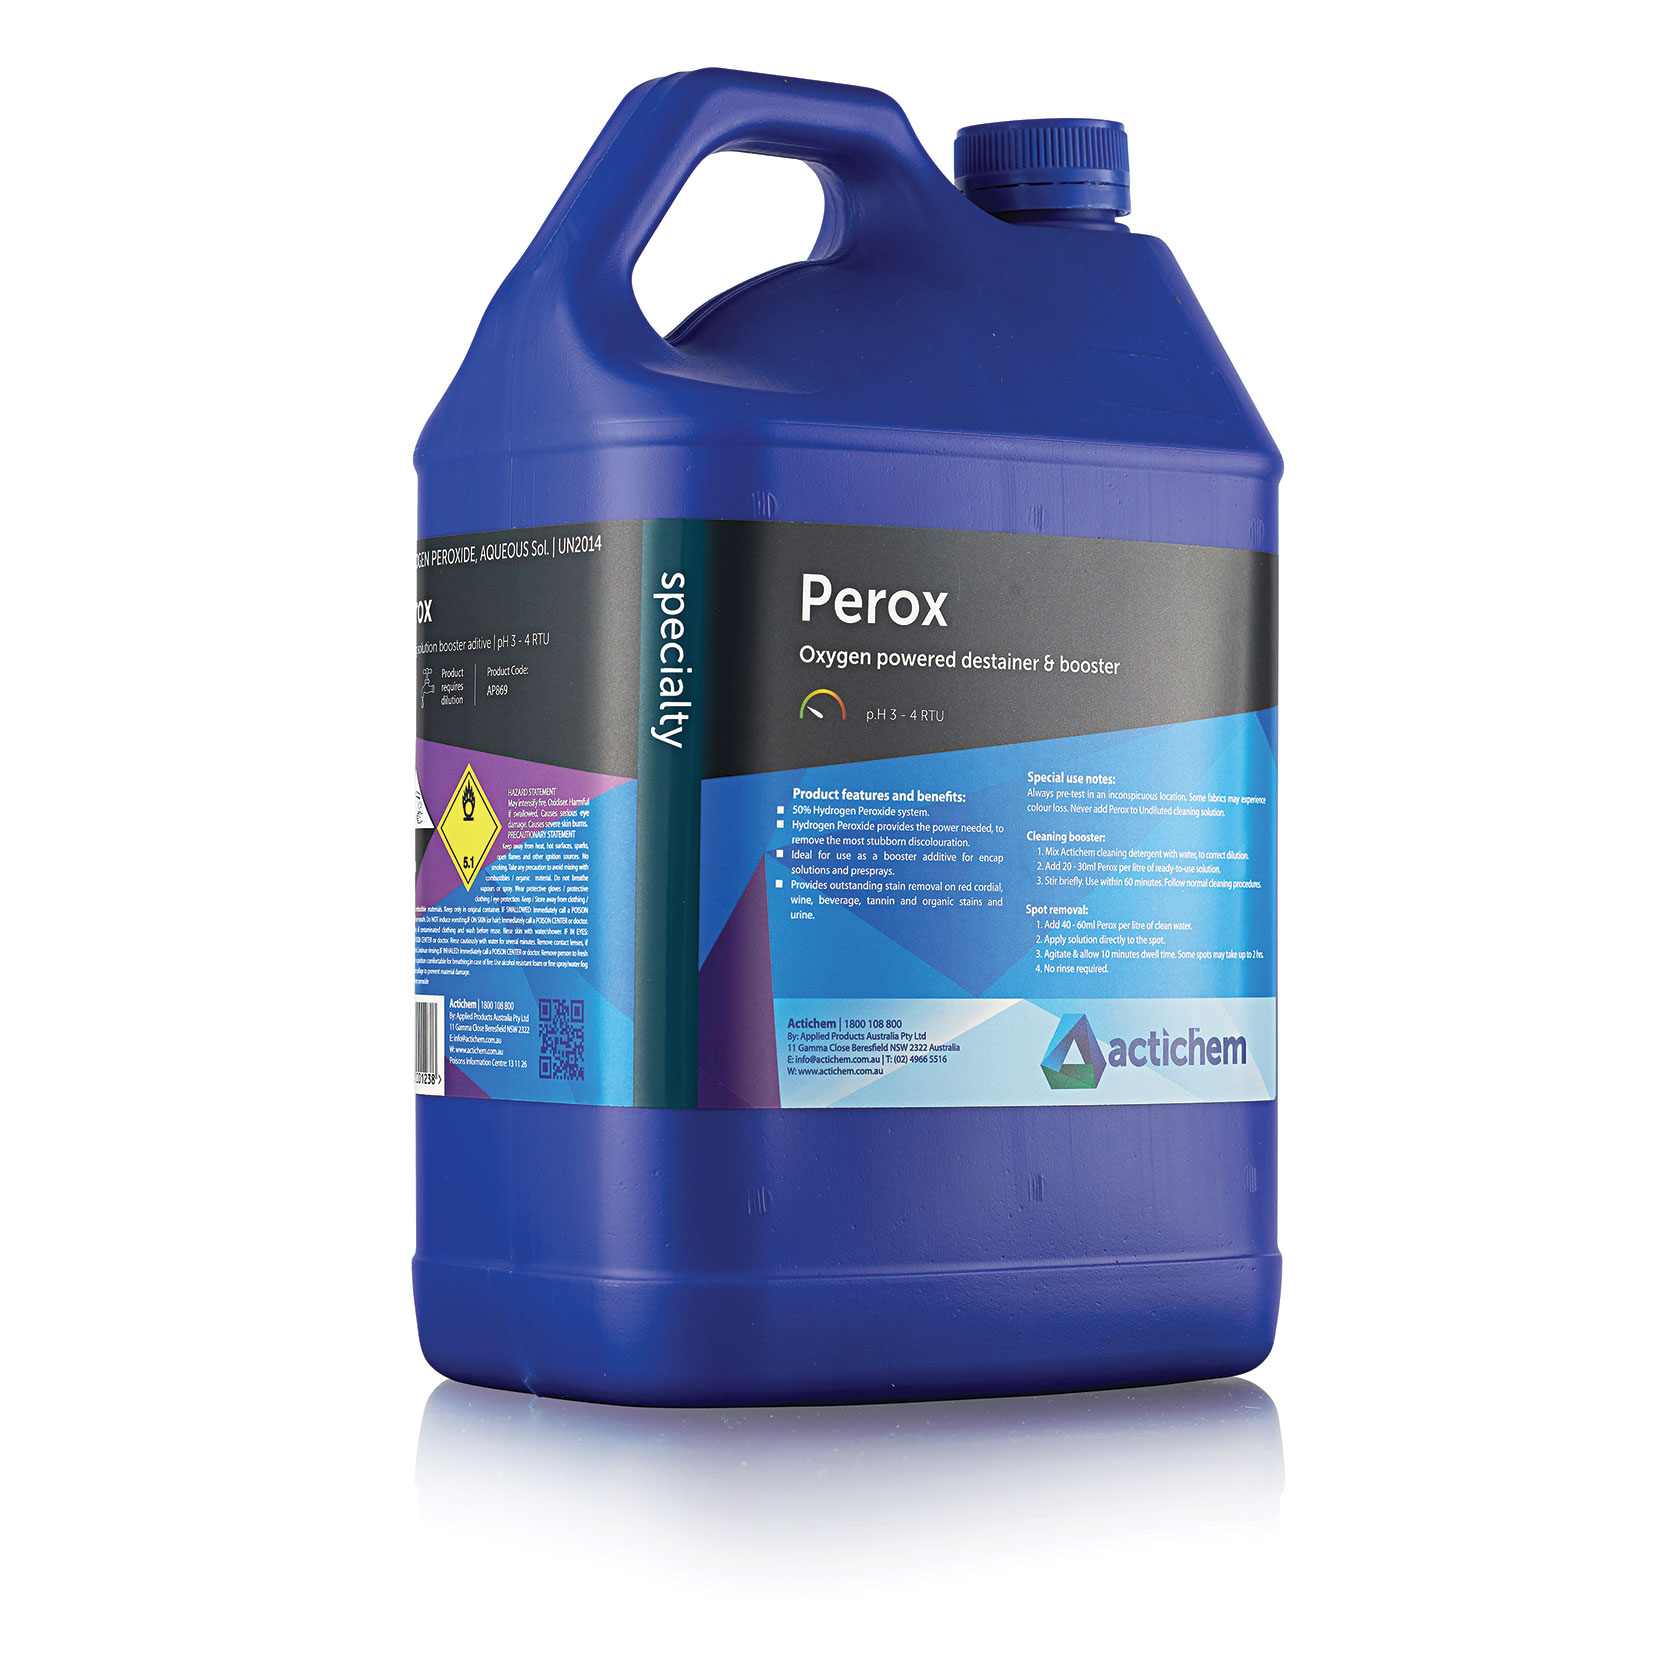 Actichem Perox high strength 50% Hydrogen Peroxide solution